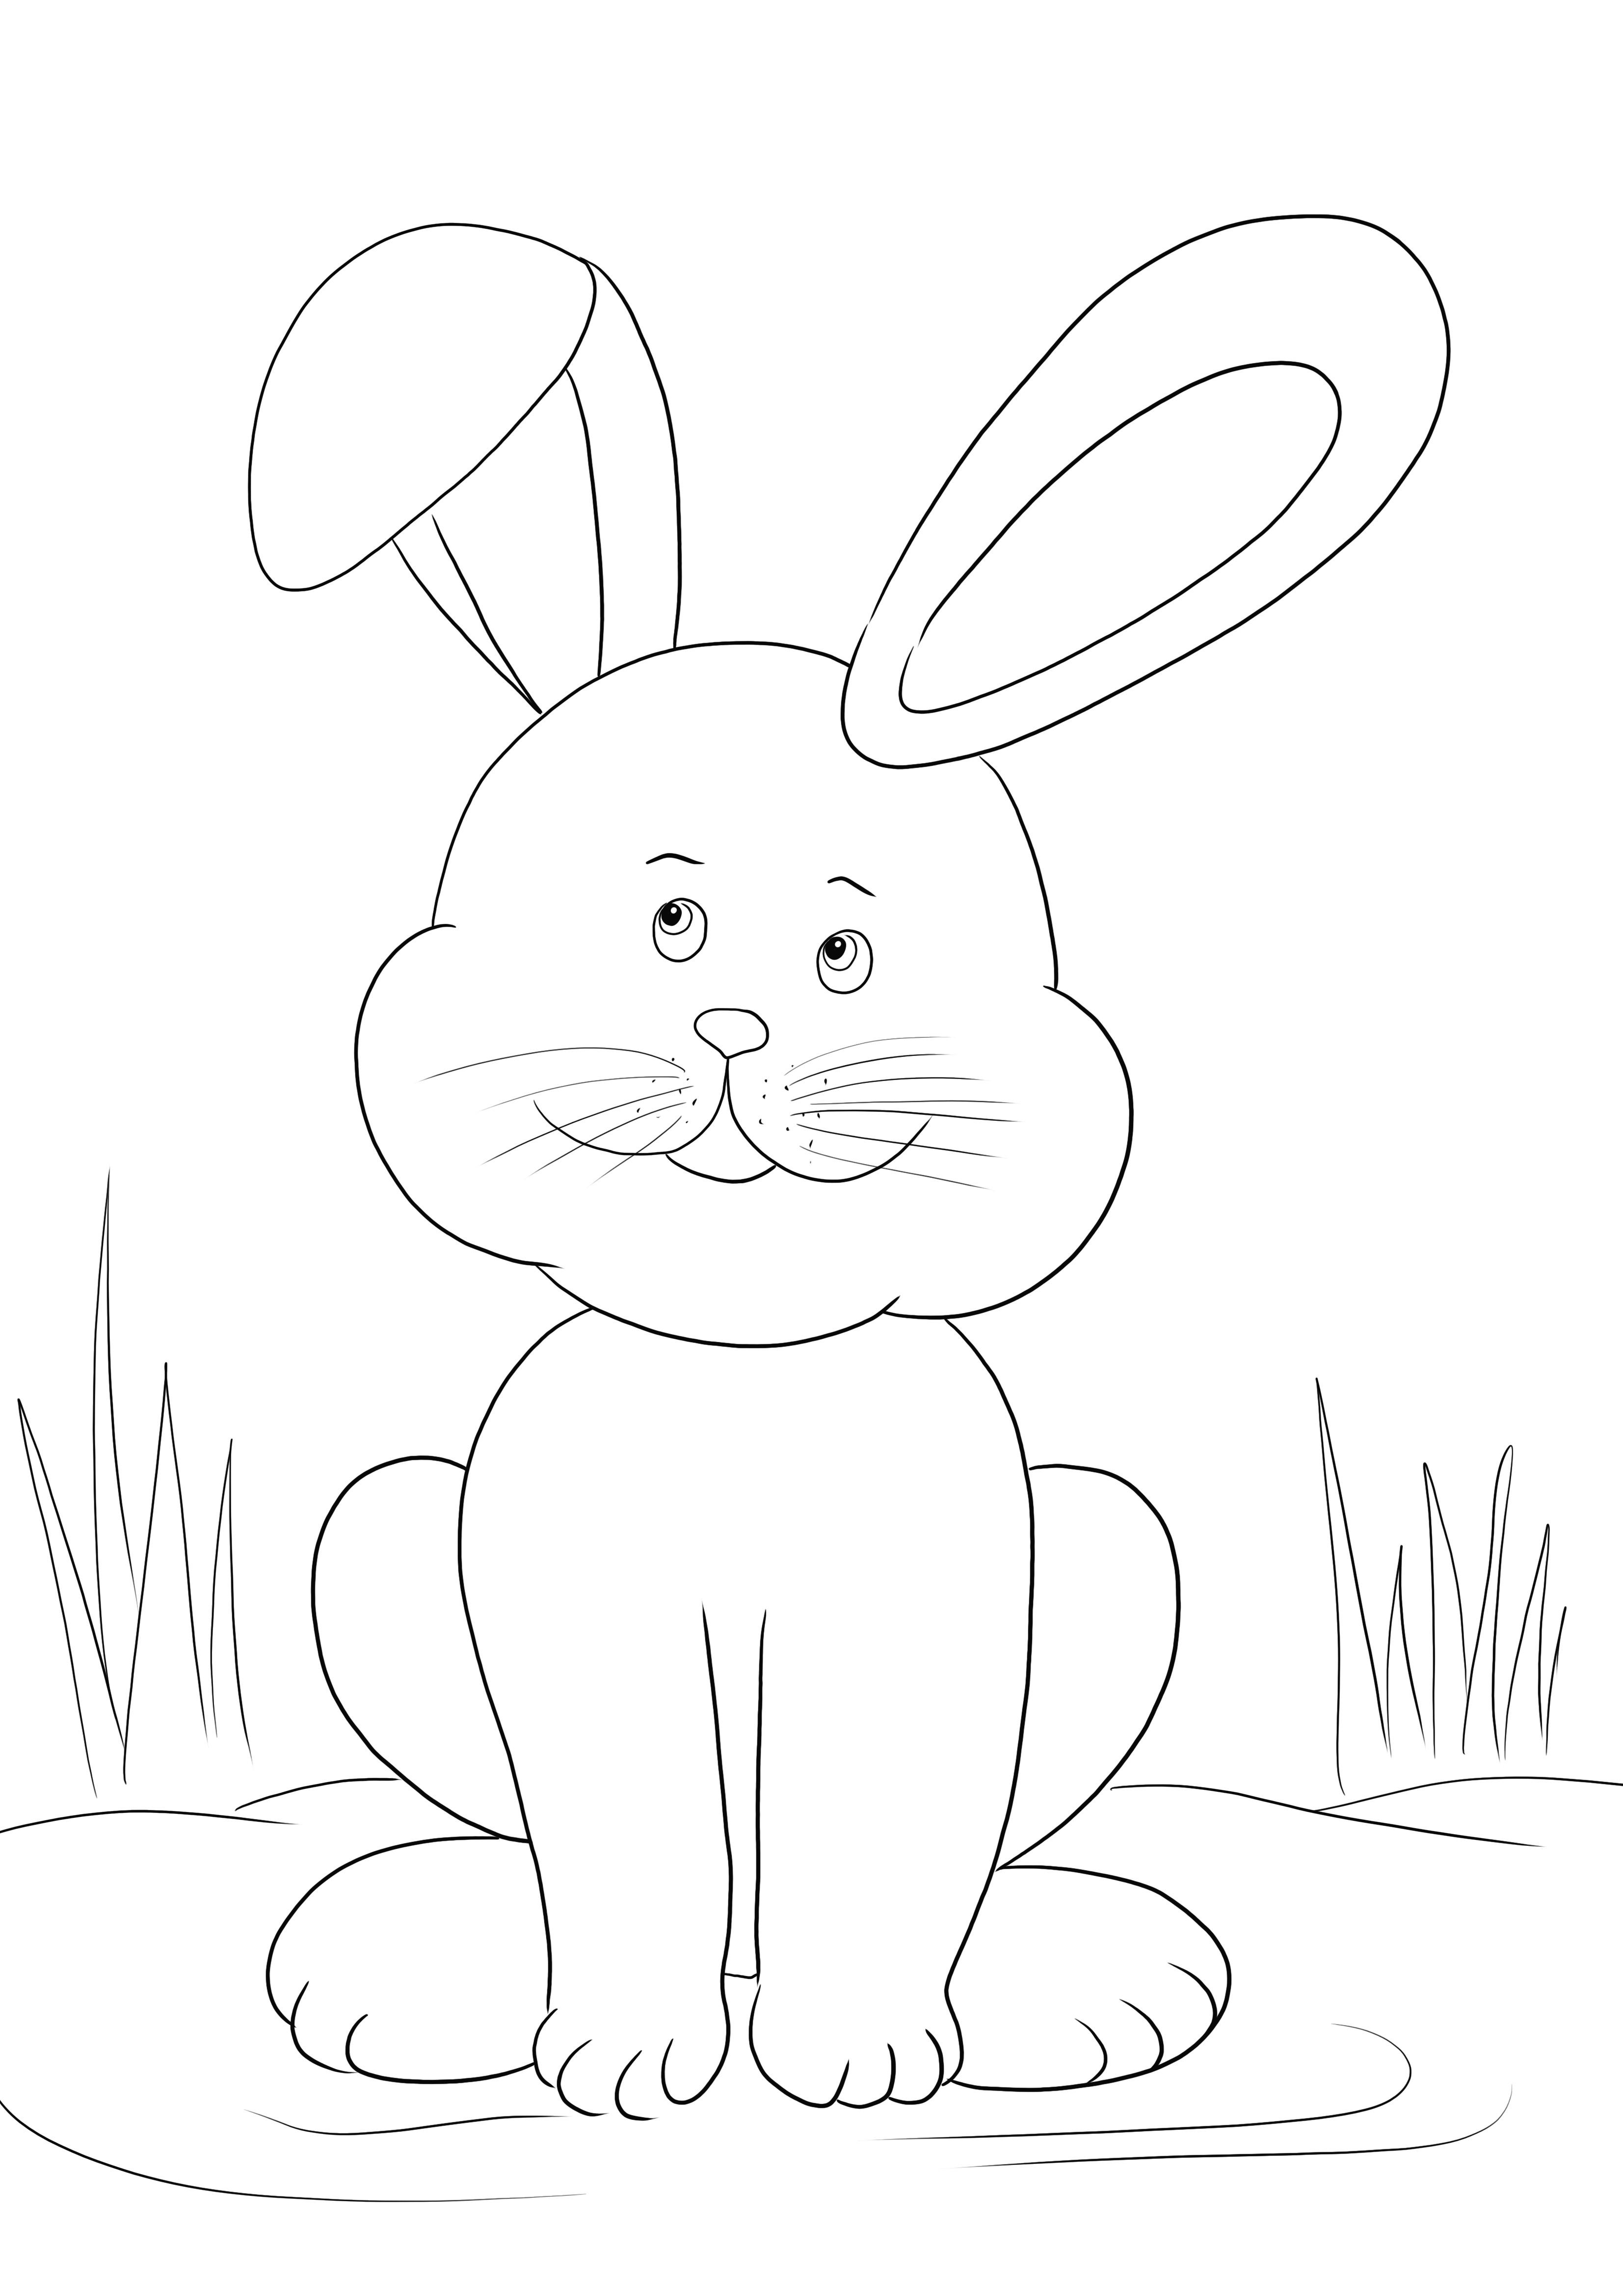 We offer our Easter Bunny coloring image for free printing or downloading